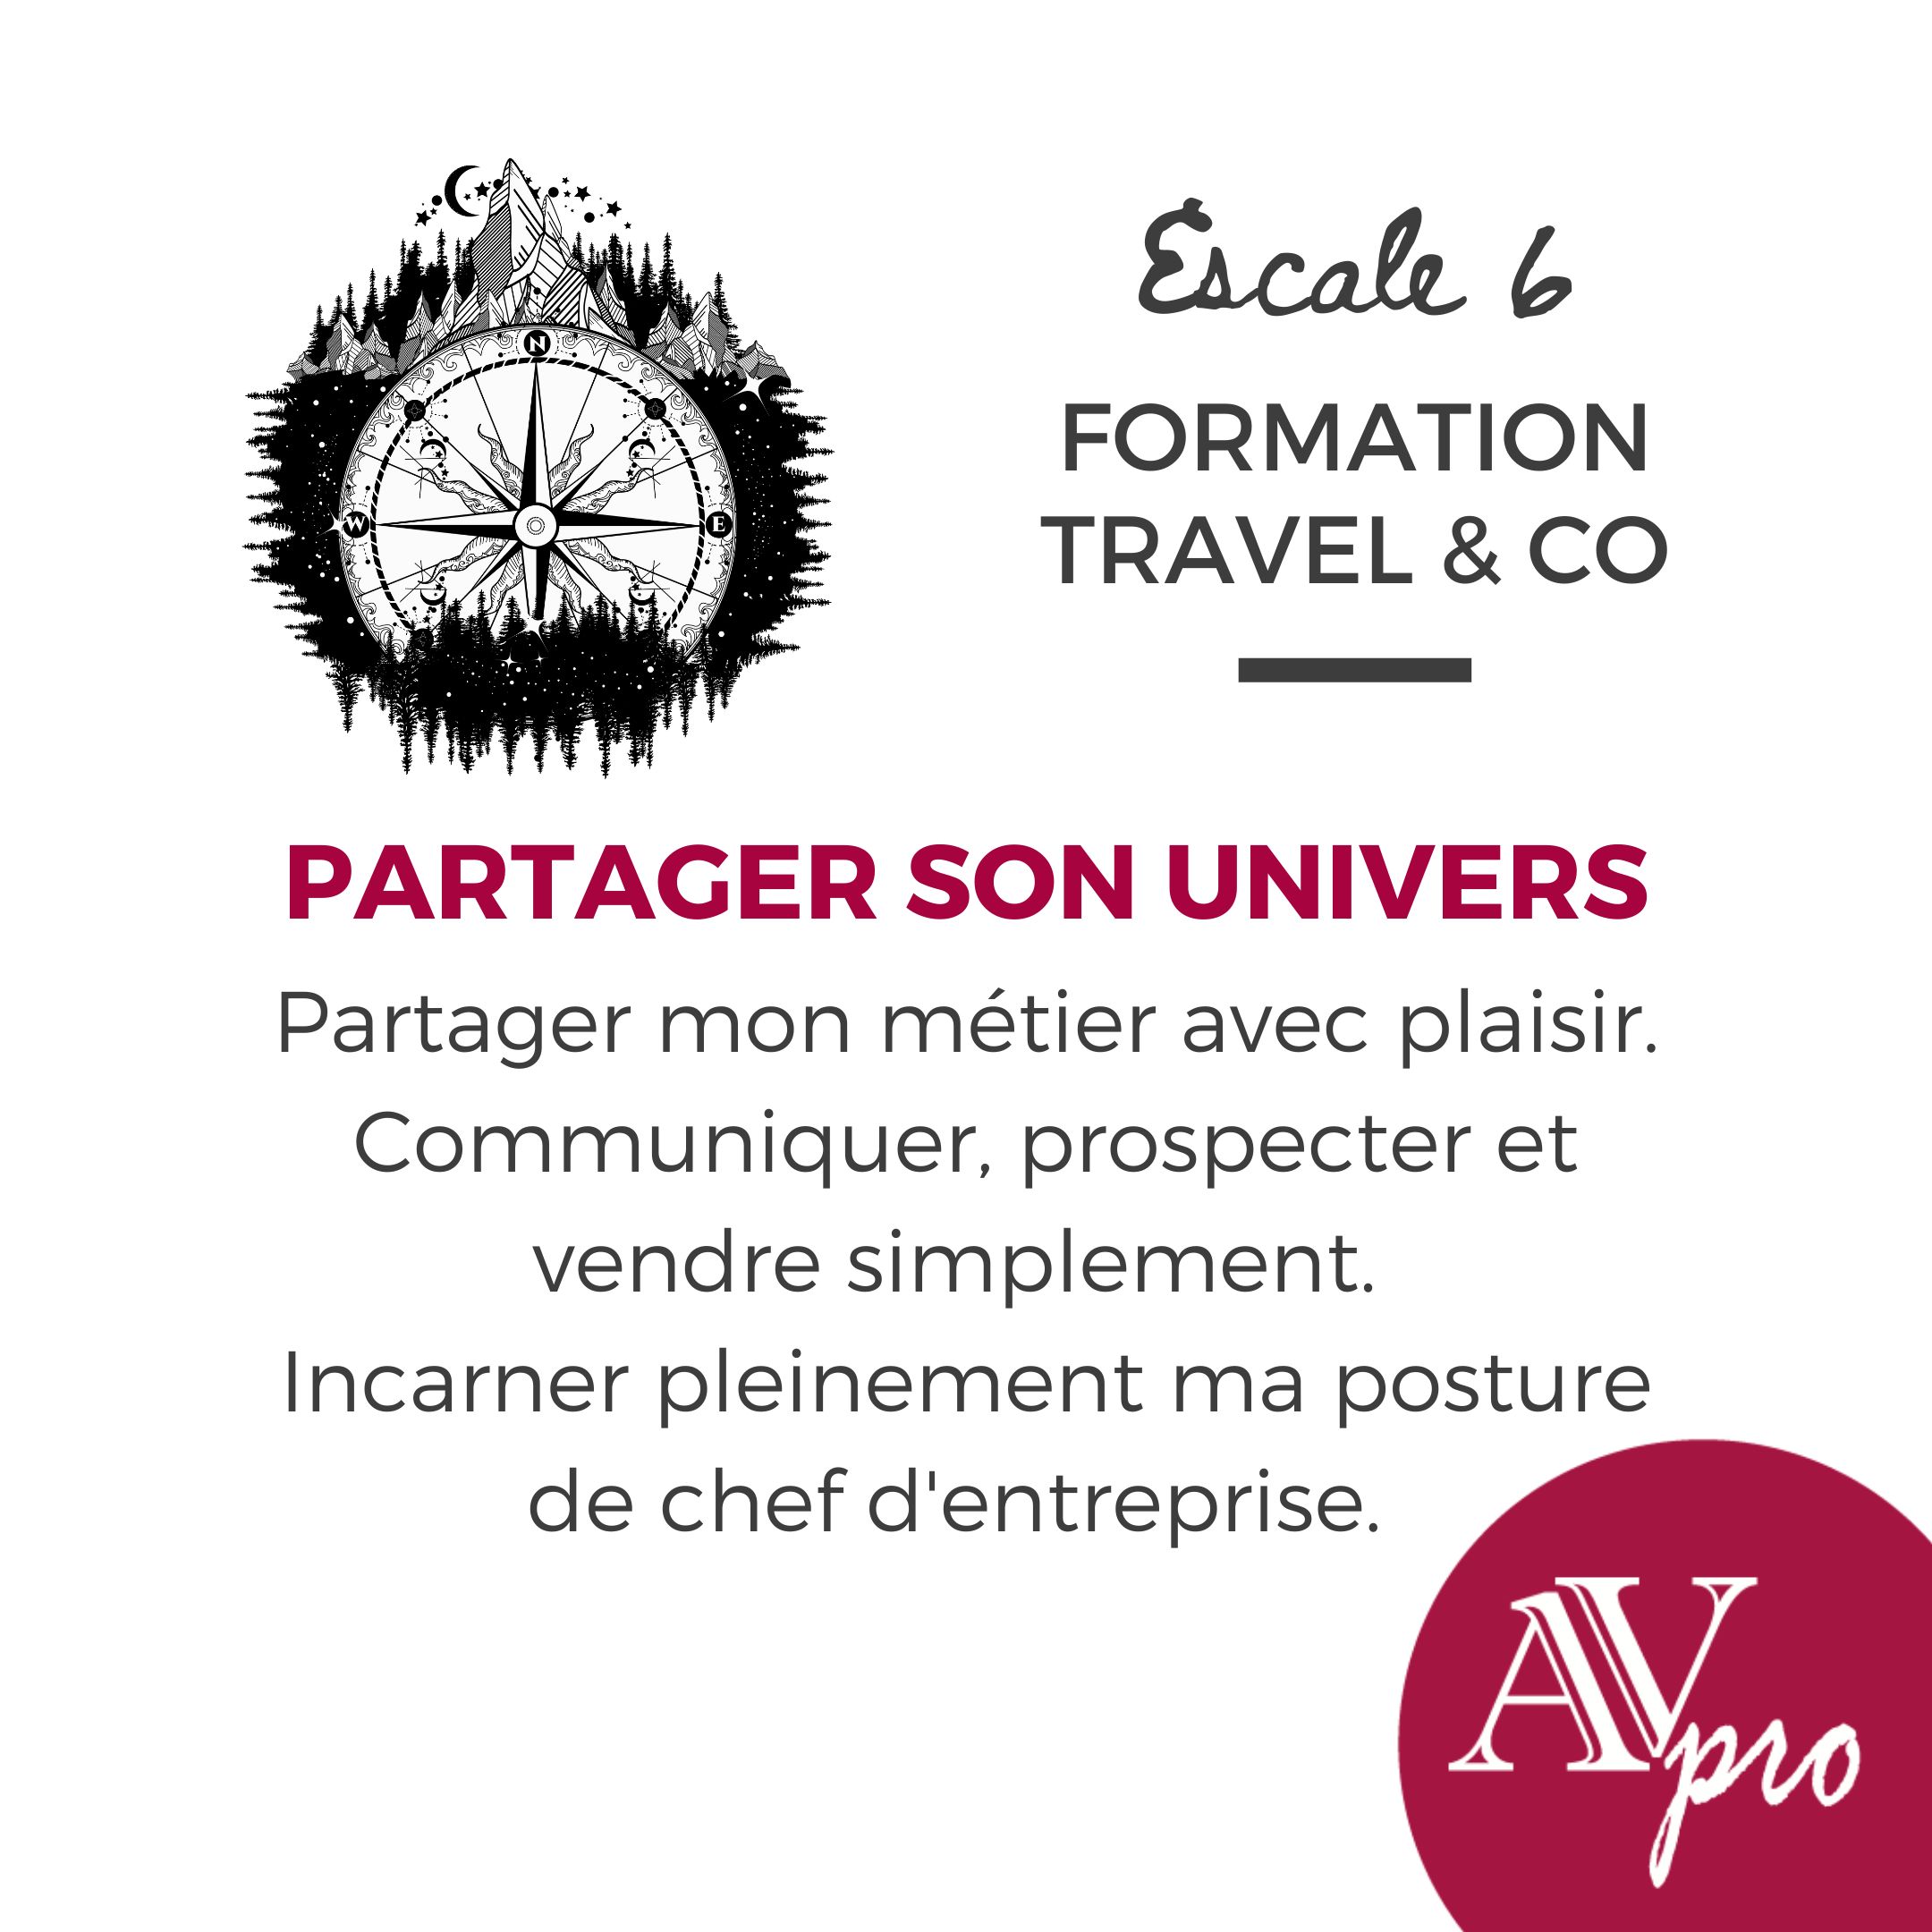 Partager son univers – formation Travel & Co #6